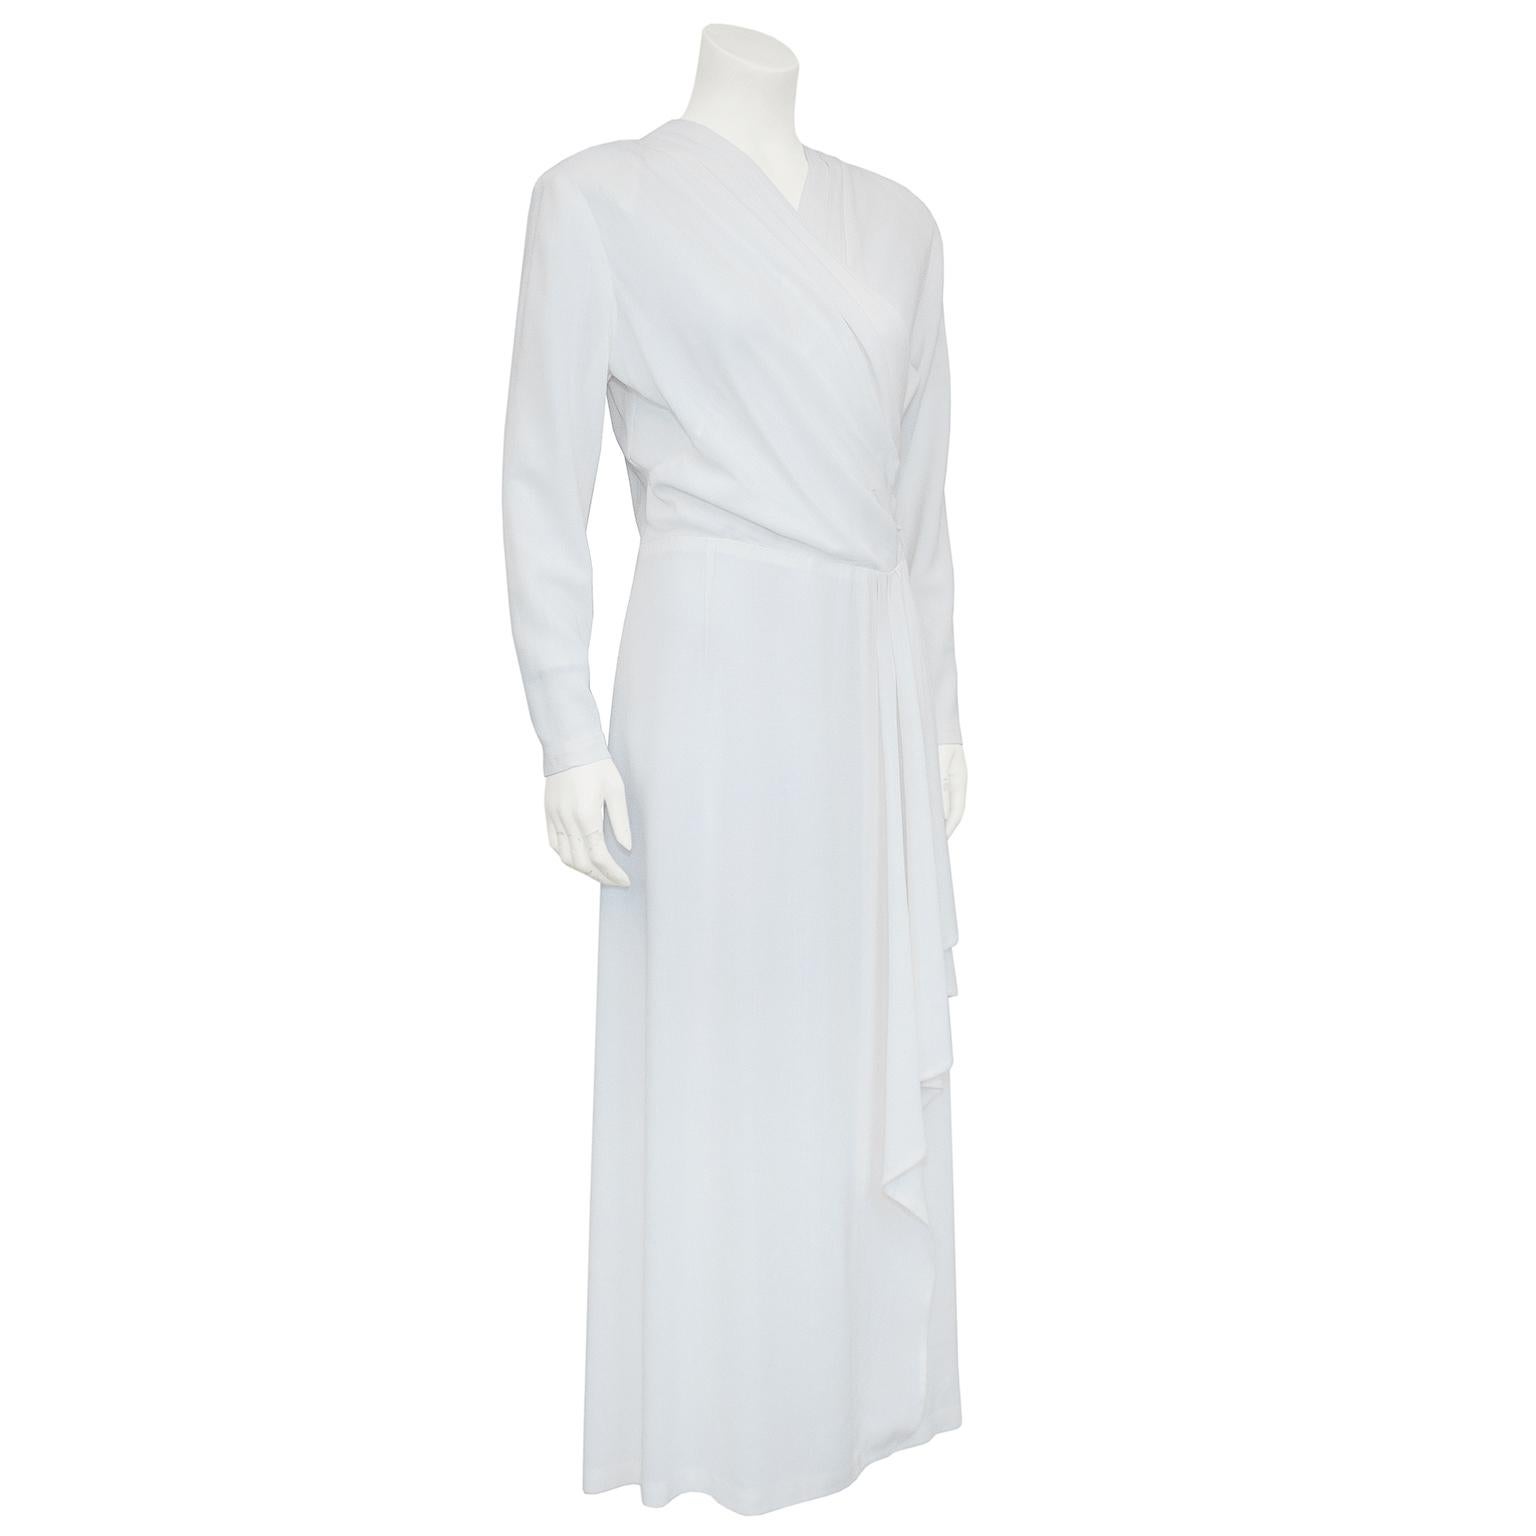 1940's white rayon crepe old Hollywood style dress with draped swag. Loosely gathered across the front bodice, fitted at the waist, mid calf length. Unusual to find a white dress from the 1940's in such excellent condition. The silhouette